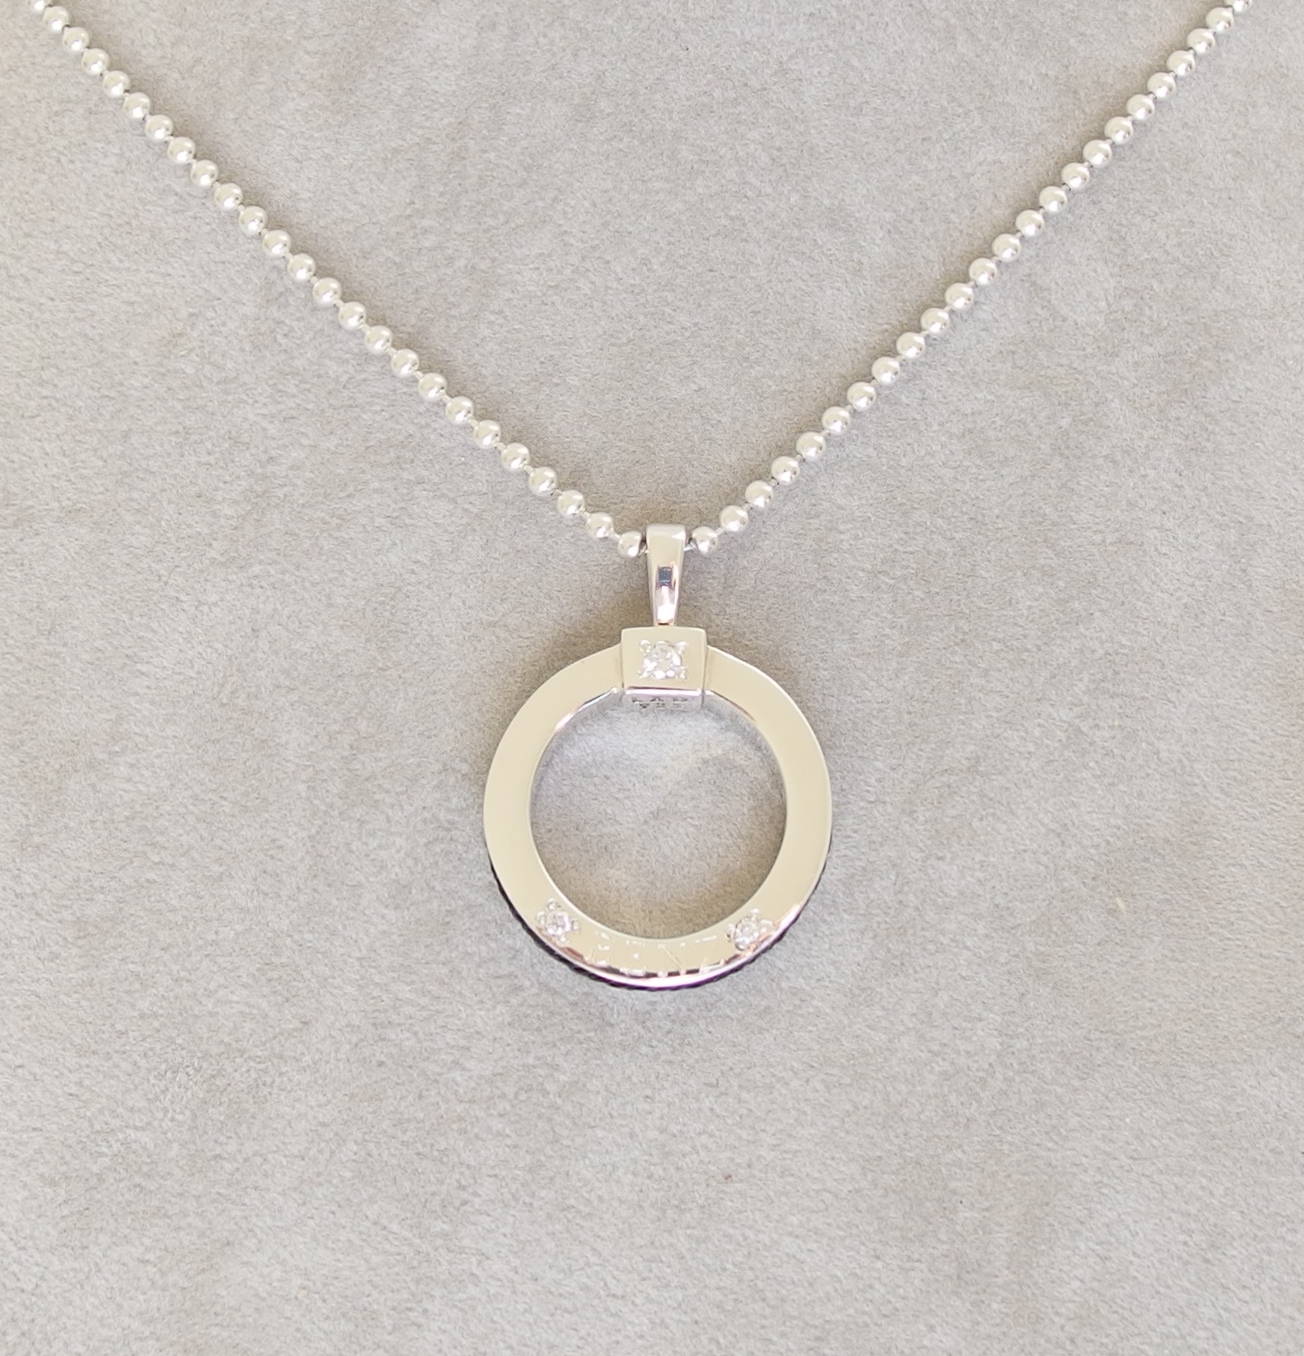 Keystone pendant with diamond and inset with horse hair